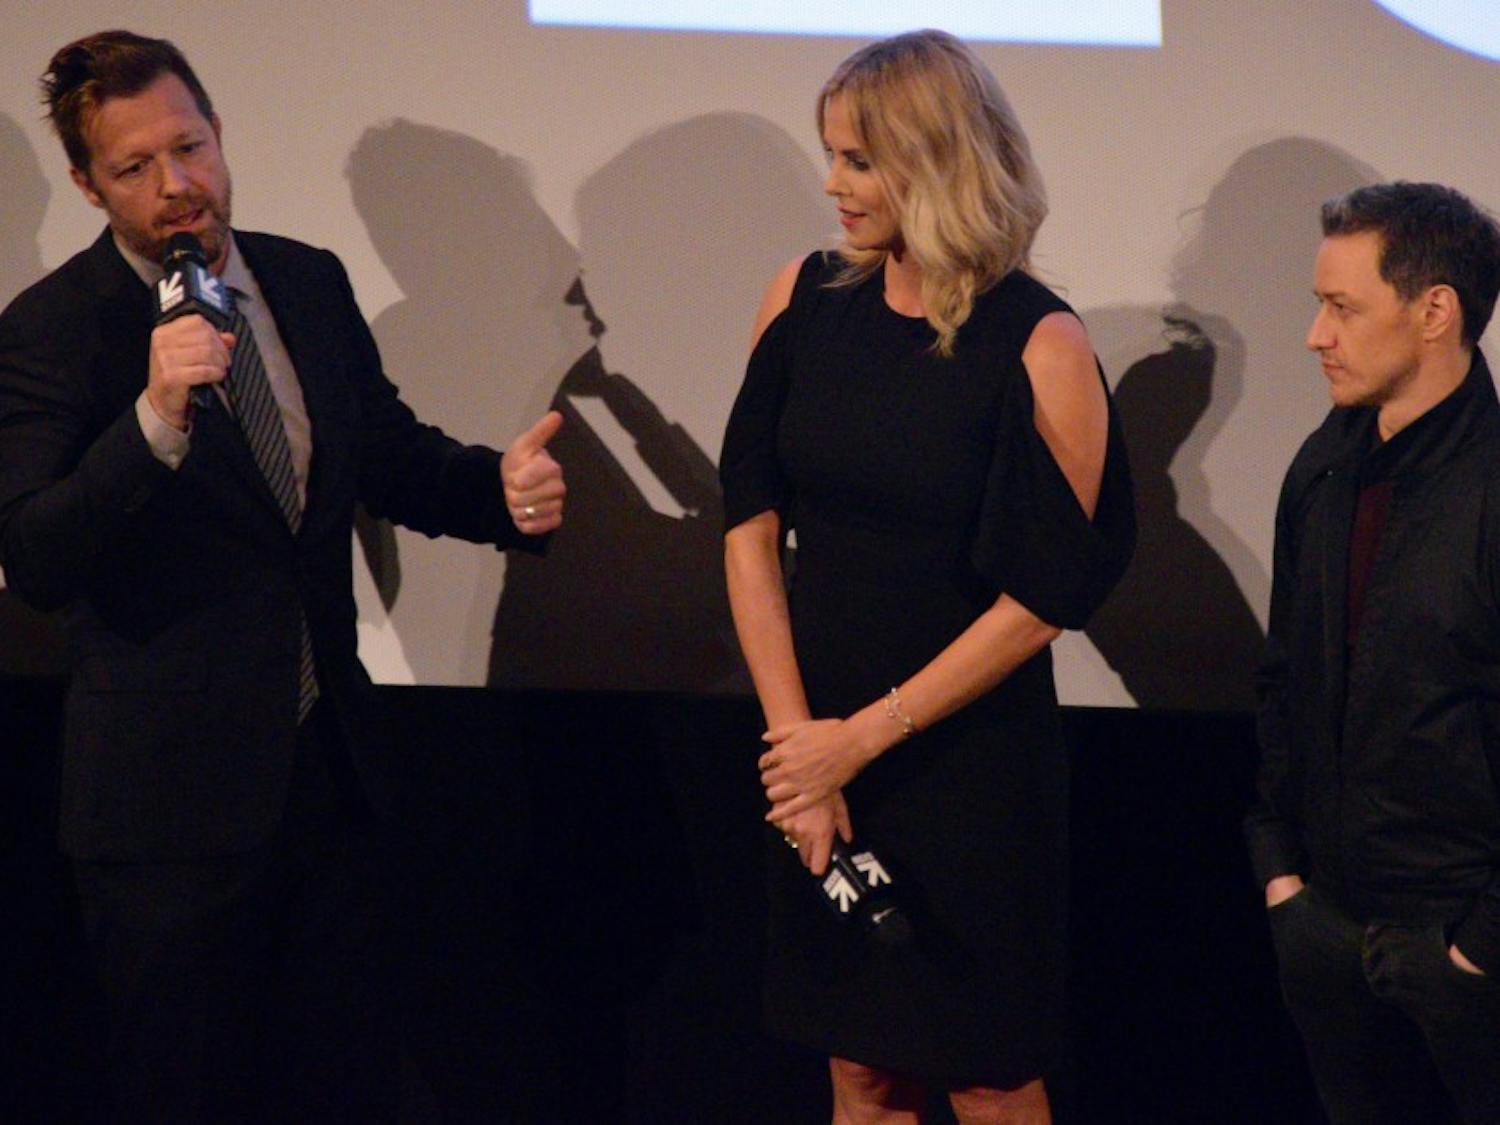 From Left: David Leitch, Charlize Theron and James McAvoy talk about "Atomic Blonde."